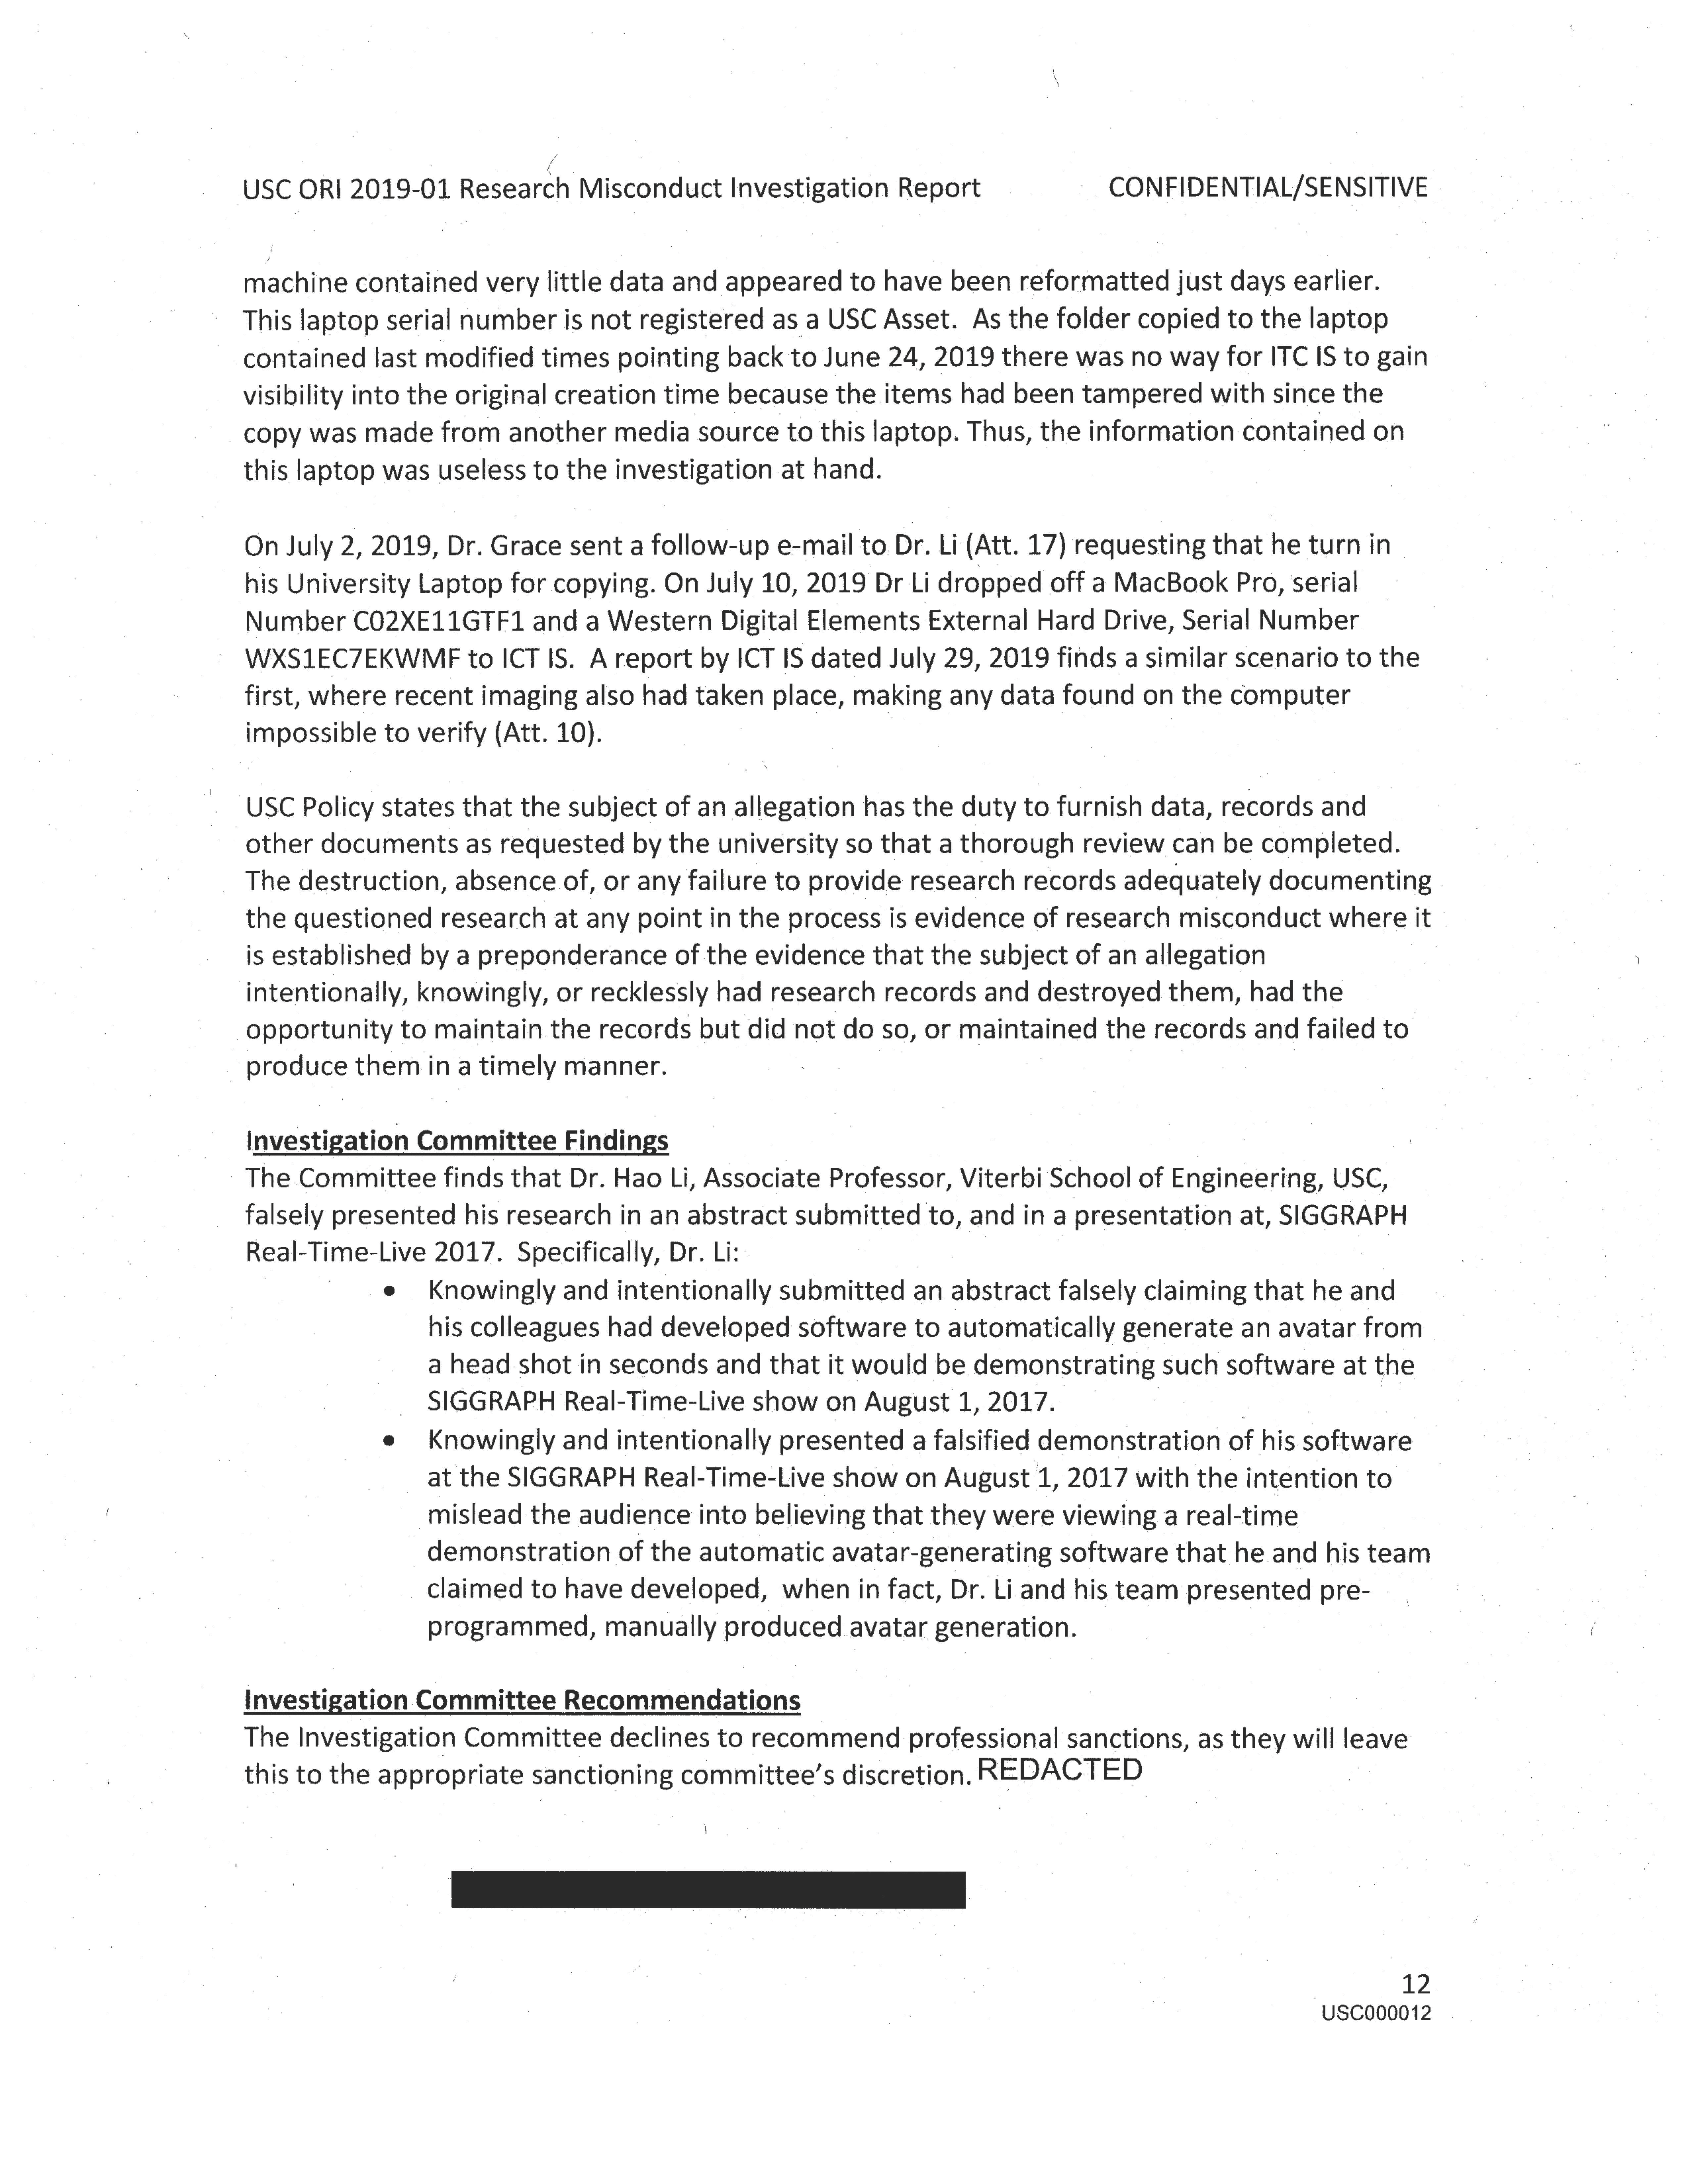 USC's Investigation Report re Hao Li's and Pinscreen's Scientific Misconduct at ACM SIGGRAPH RTL 2017 - Full Report Page 14